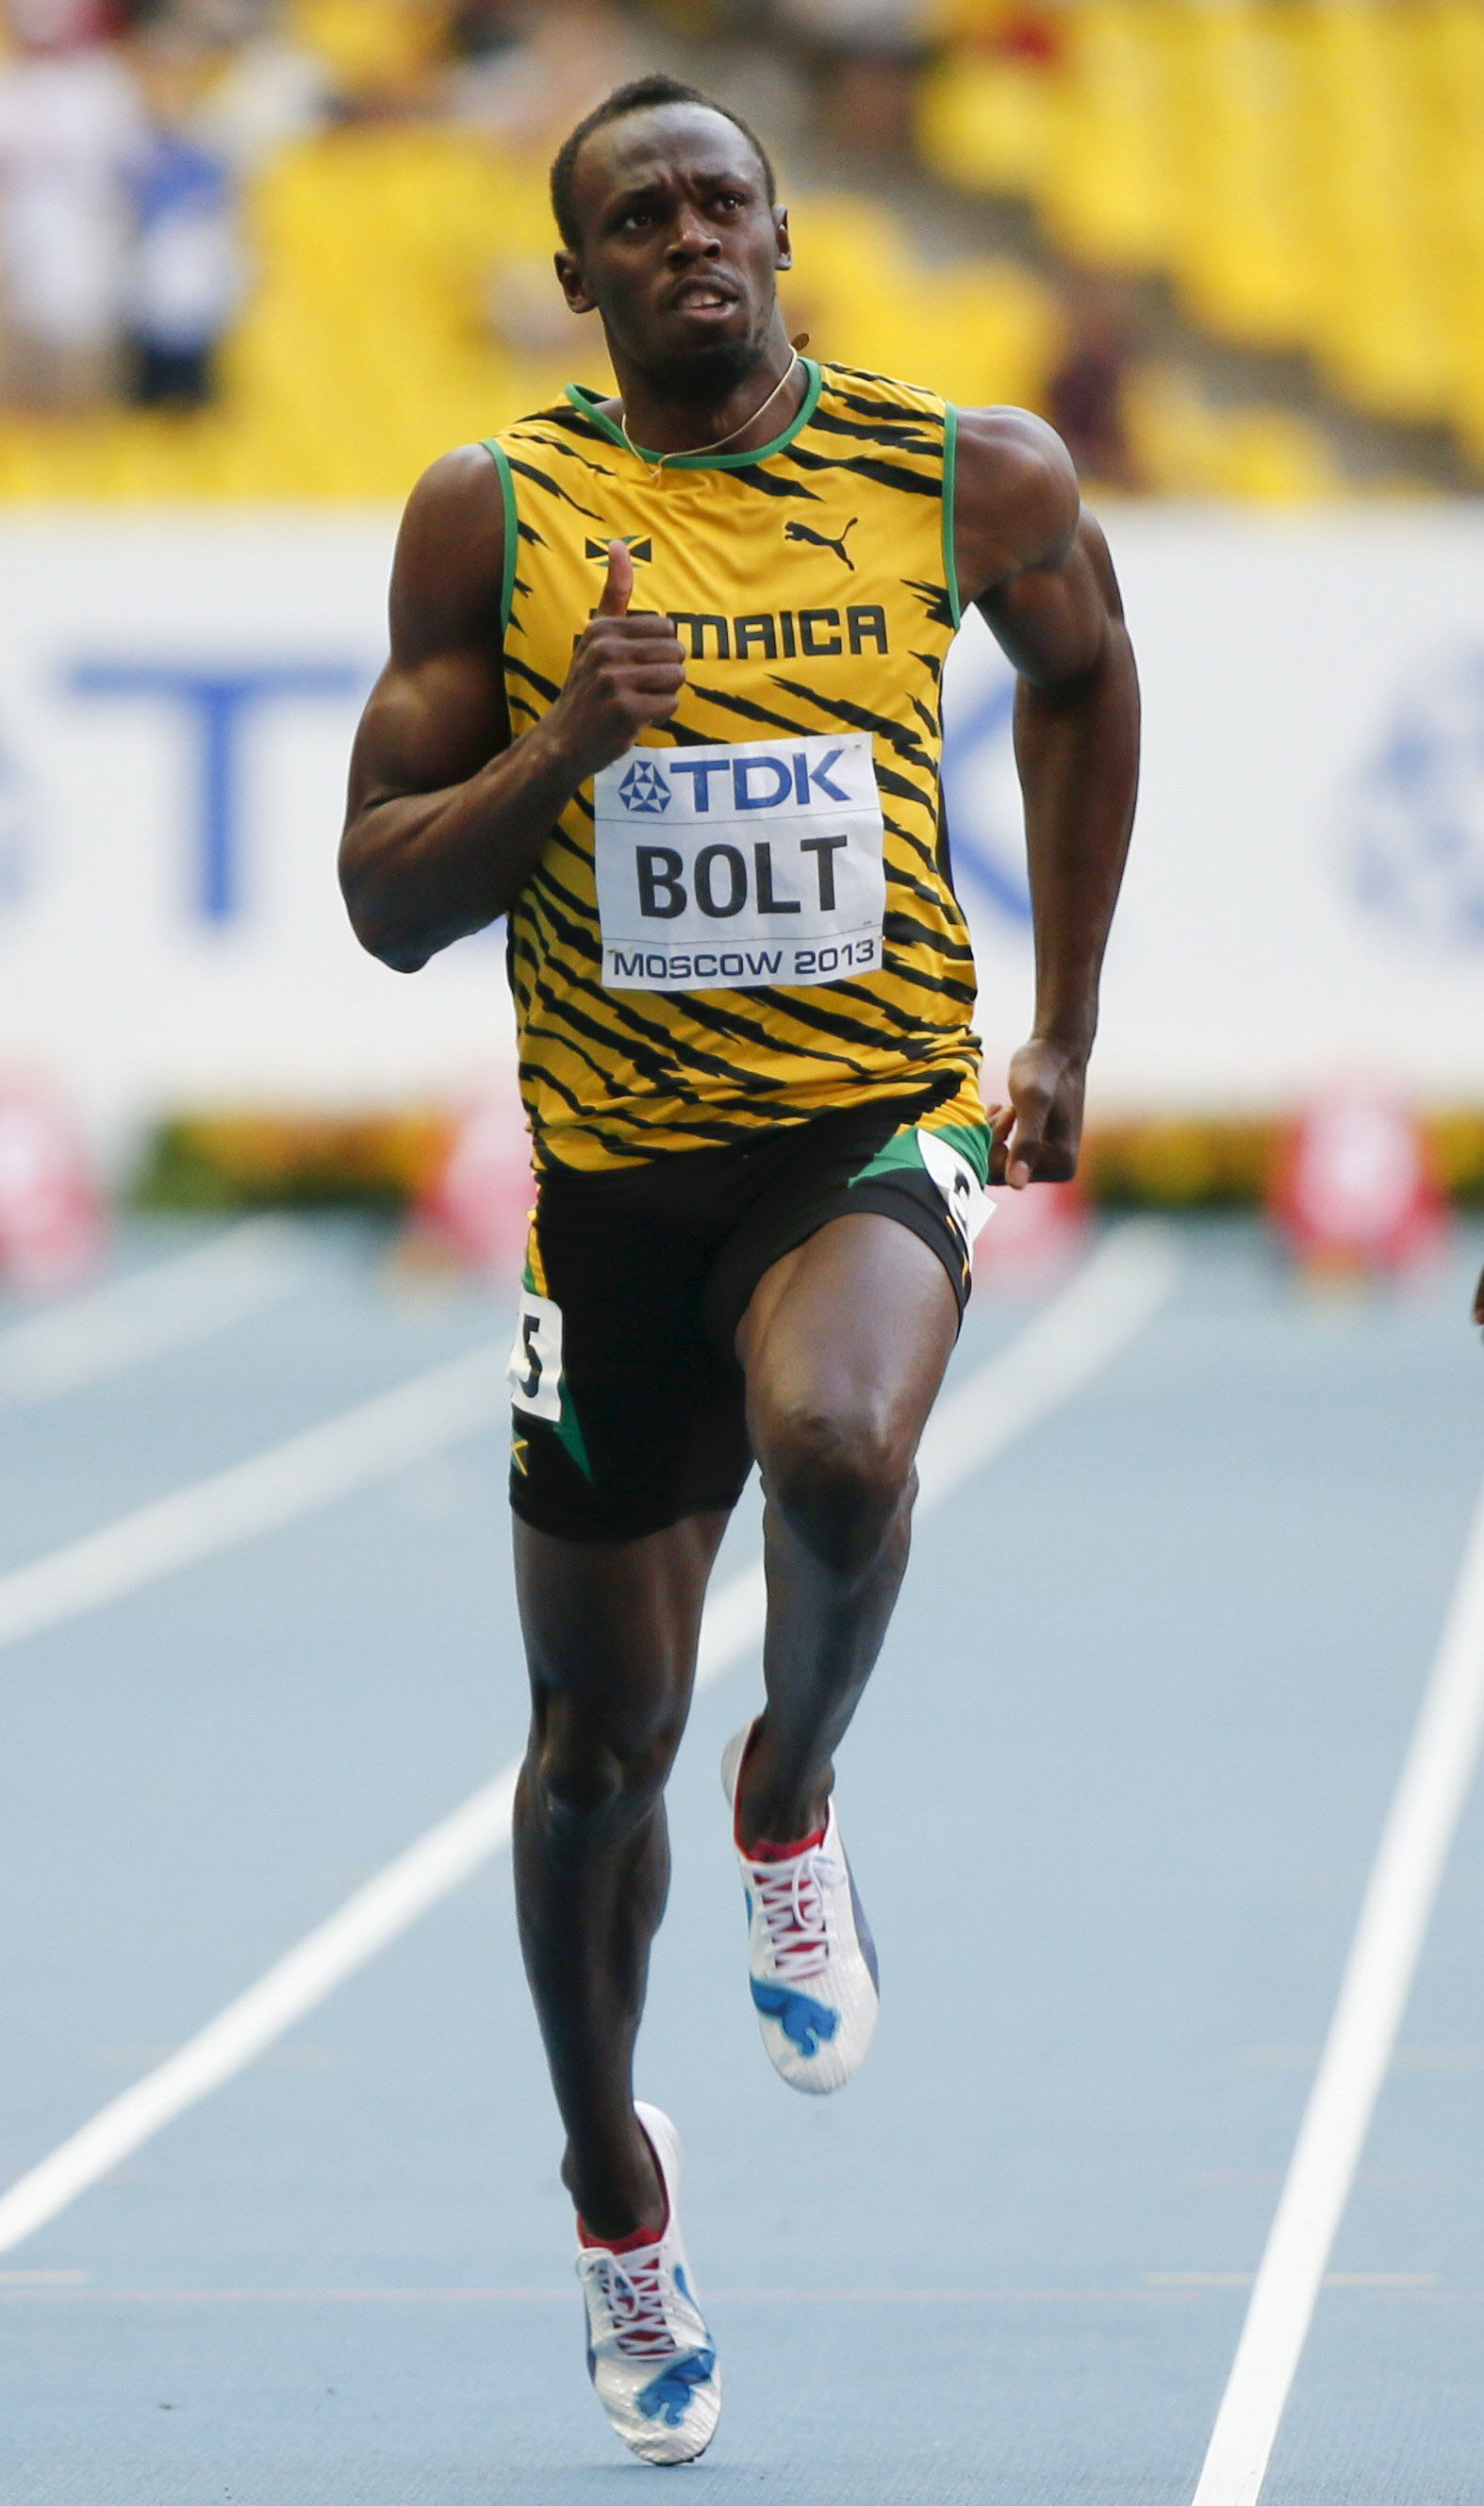 File photo of Bolt of Jamaica competing in the men's 100 metres semi-final heat event during the IAAF World Athletics Championships at the Luzhniki stadium in Moscow